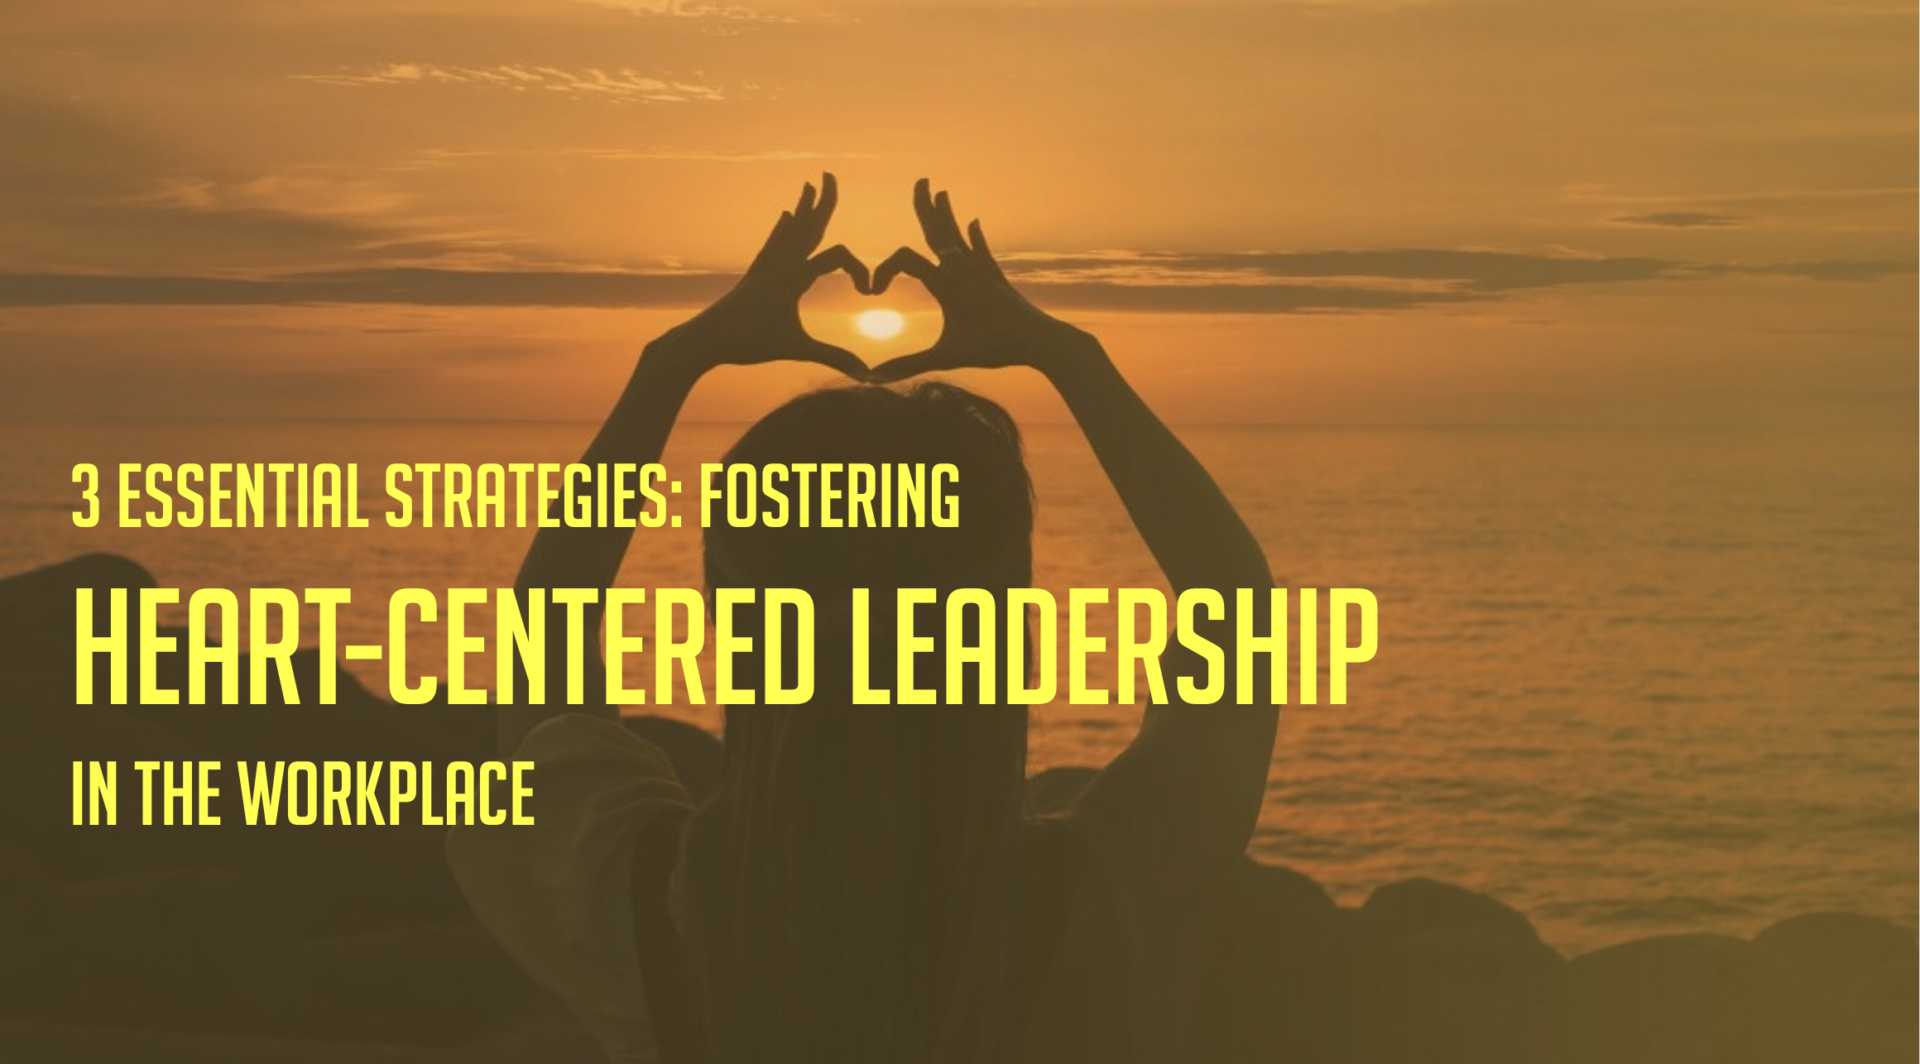 3 Essential Strategies for Fostering Heart-Centered Leadership in the Workplace